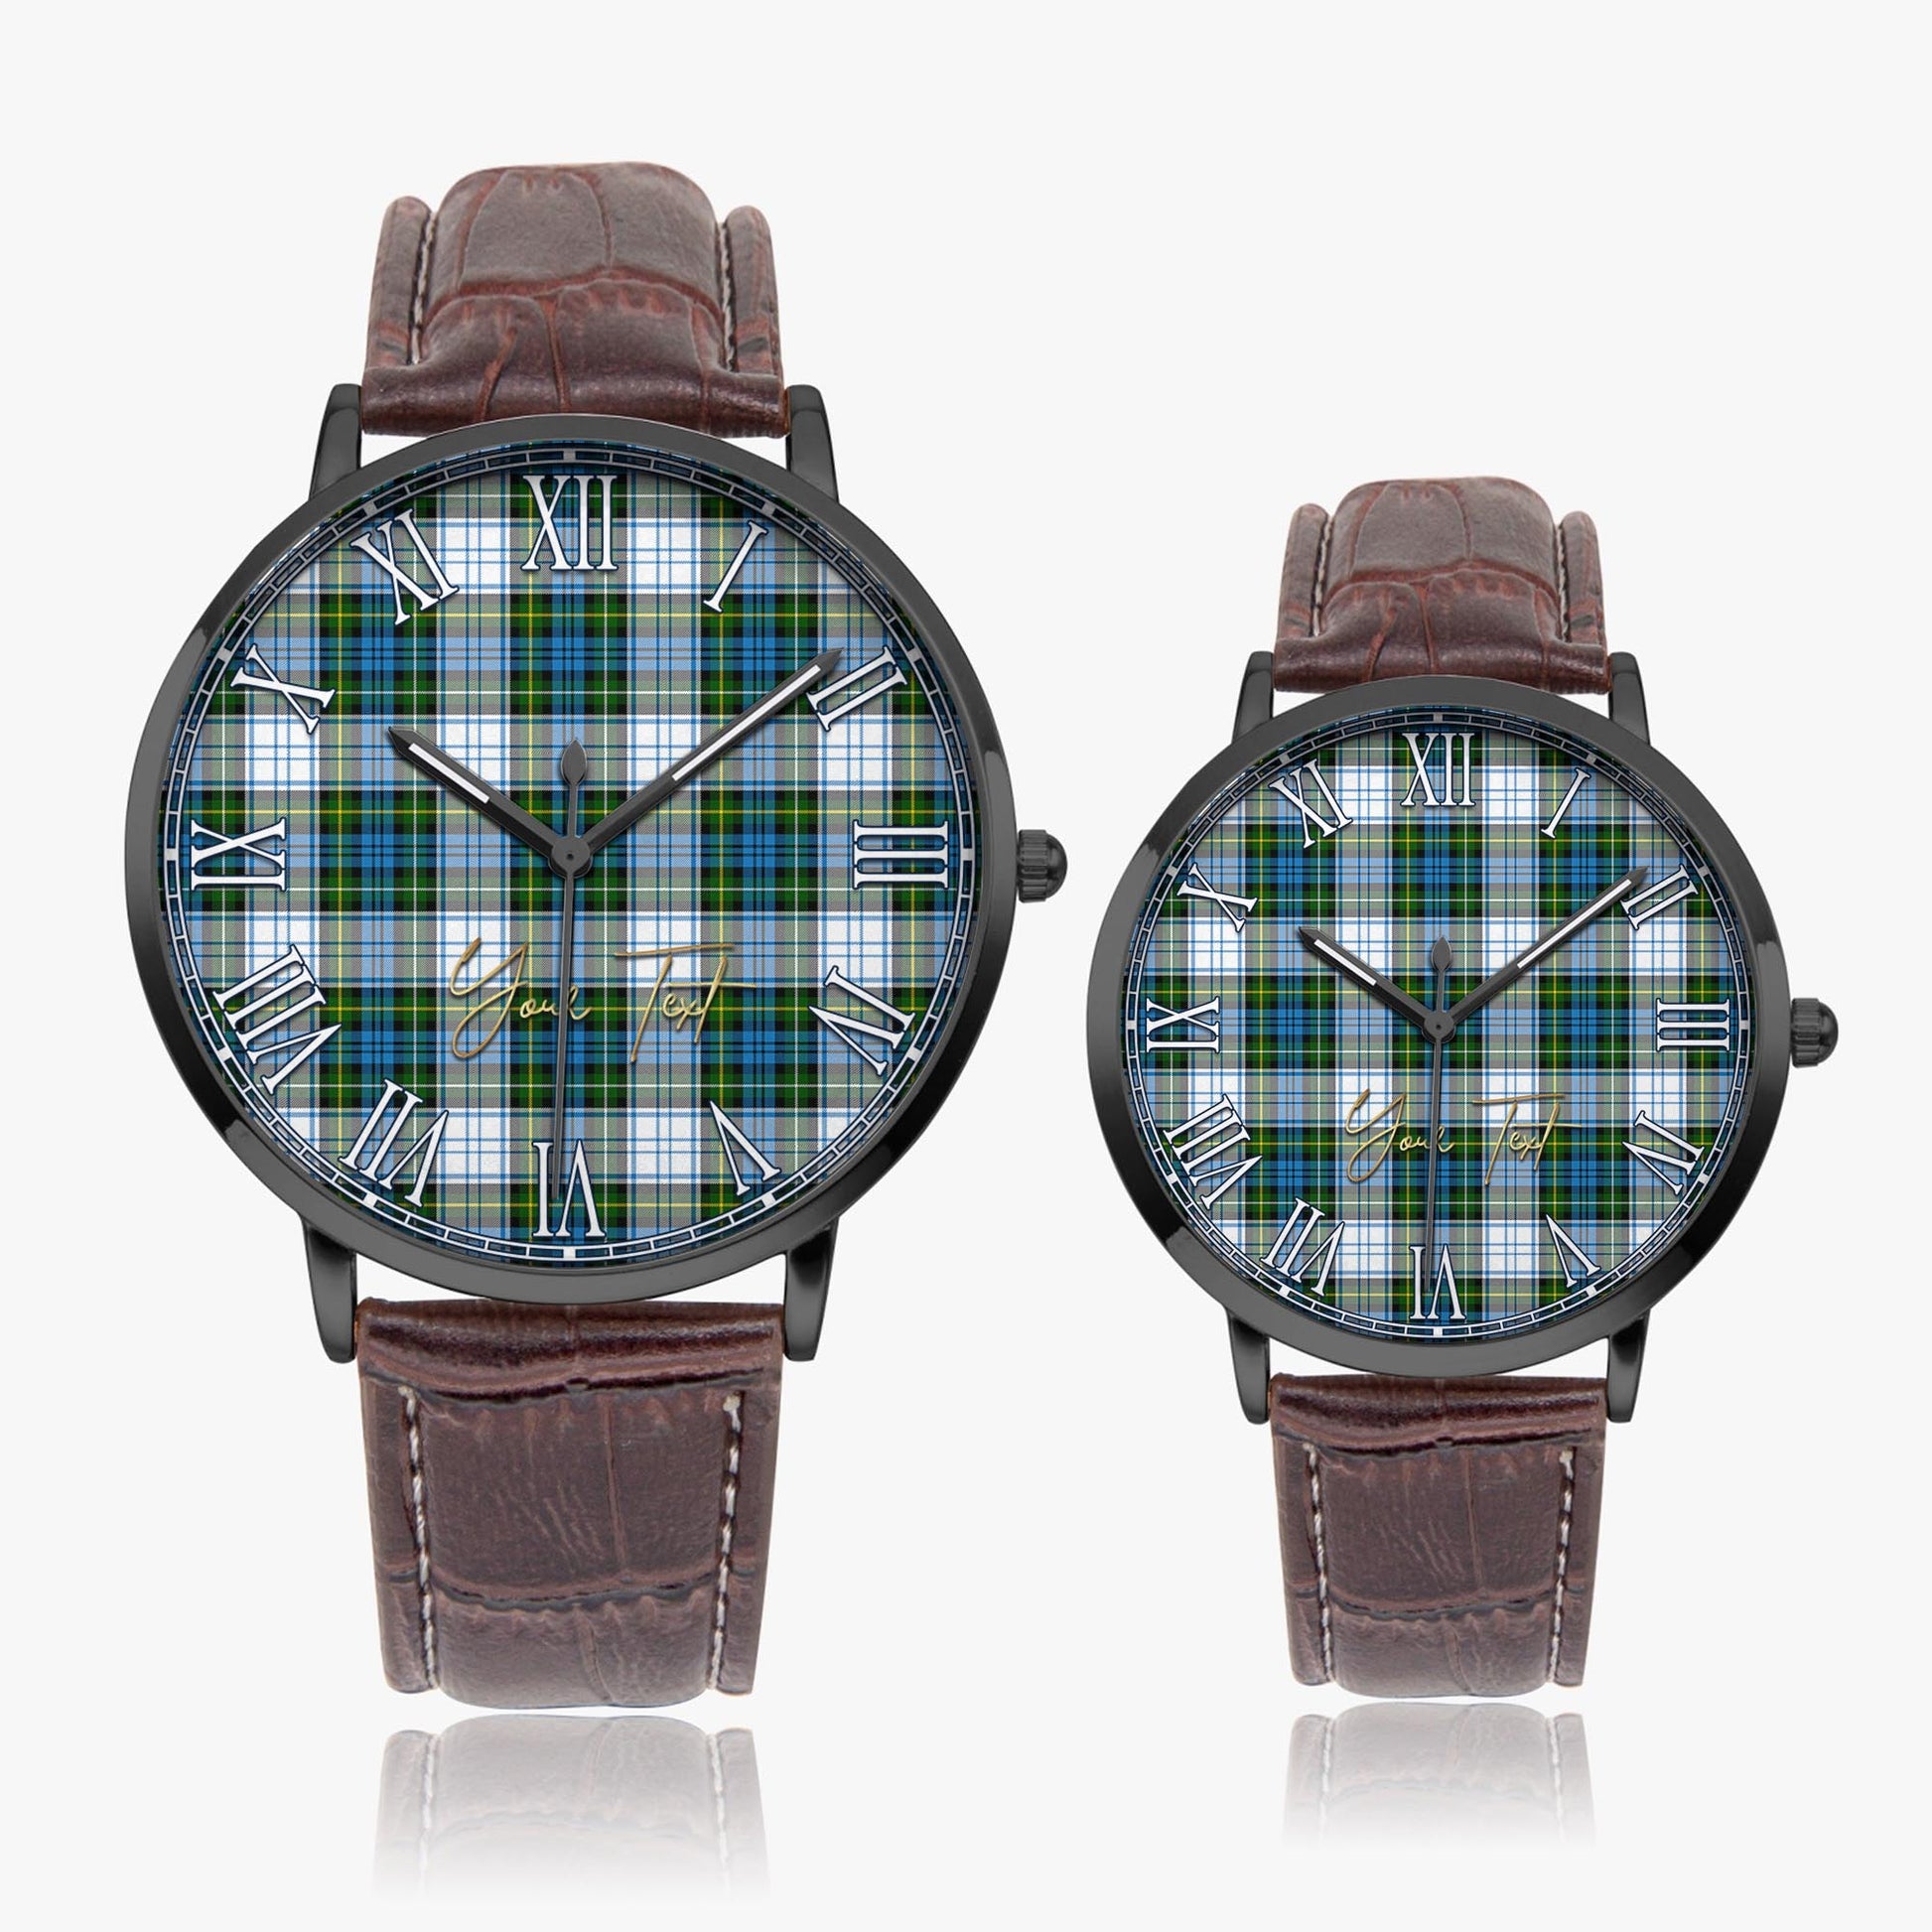 Campbell Dress Tartan Personalized Your Text Leather Trap Quartz Watch Ultra Thin Black Case With Brown Leather Strap - Tartanvibesclothing